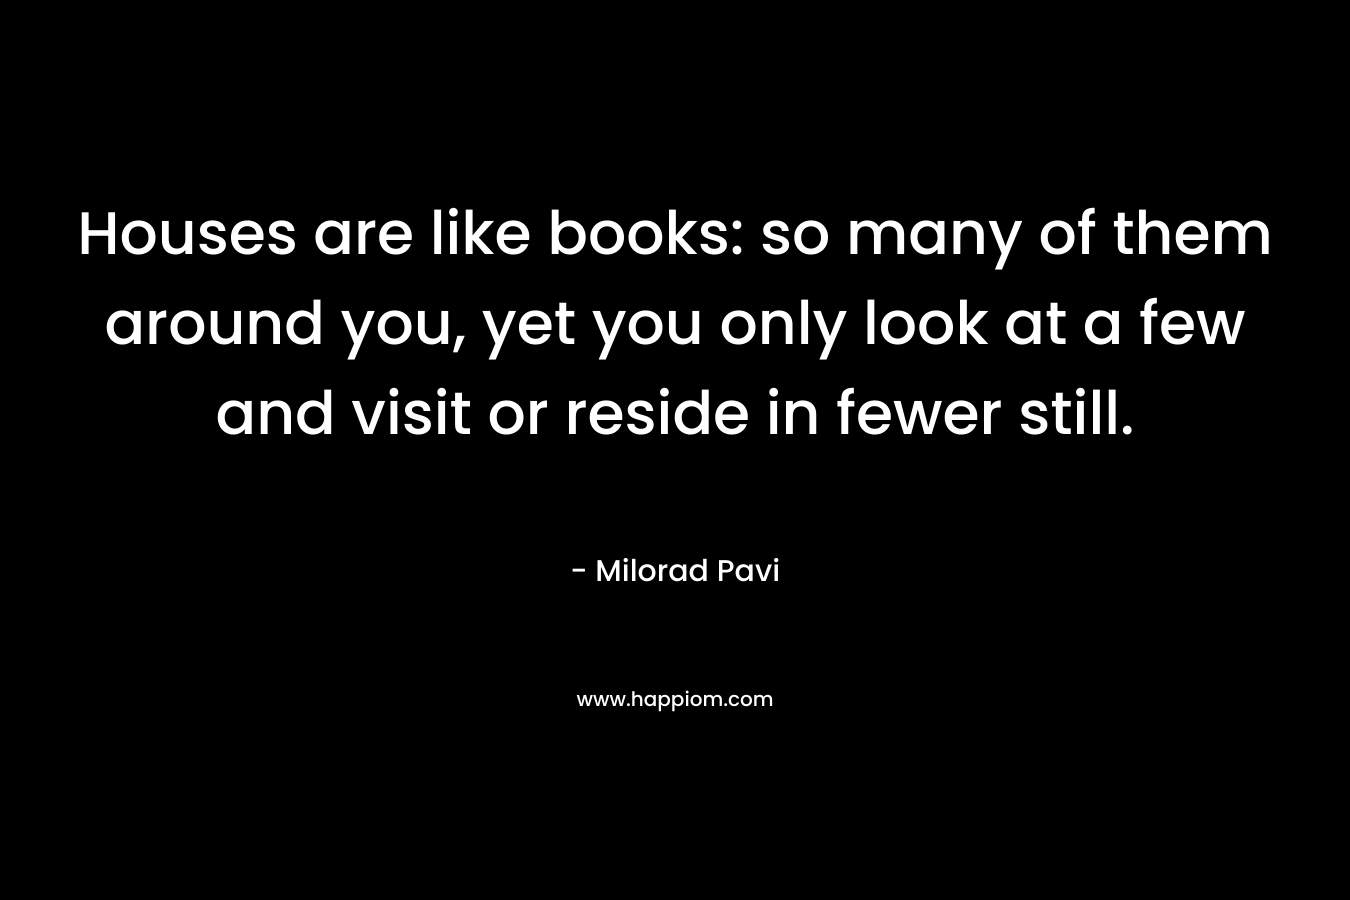 Houses are like books: so many of them around you, yet you only look at a few and visit or reside in fewer still. – Milorad Pavi